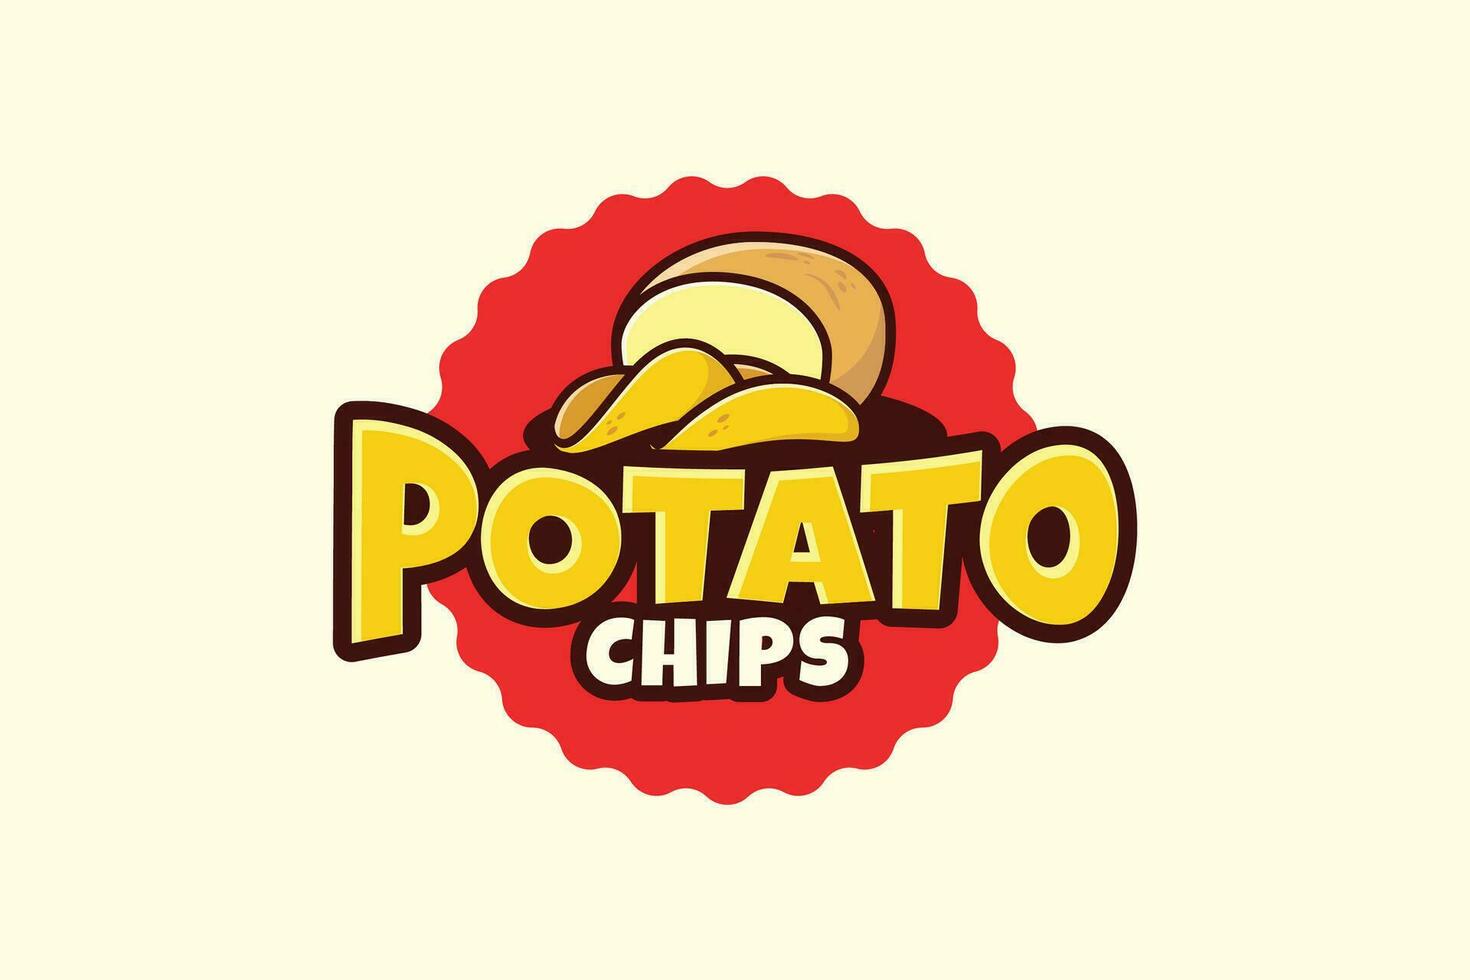 Potato chips logo with a combination of a potato and chips in a cartoon and retro style. vector